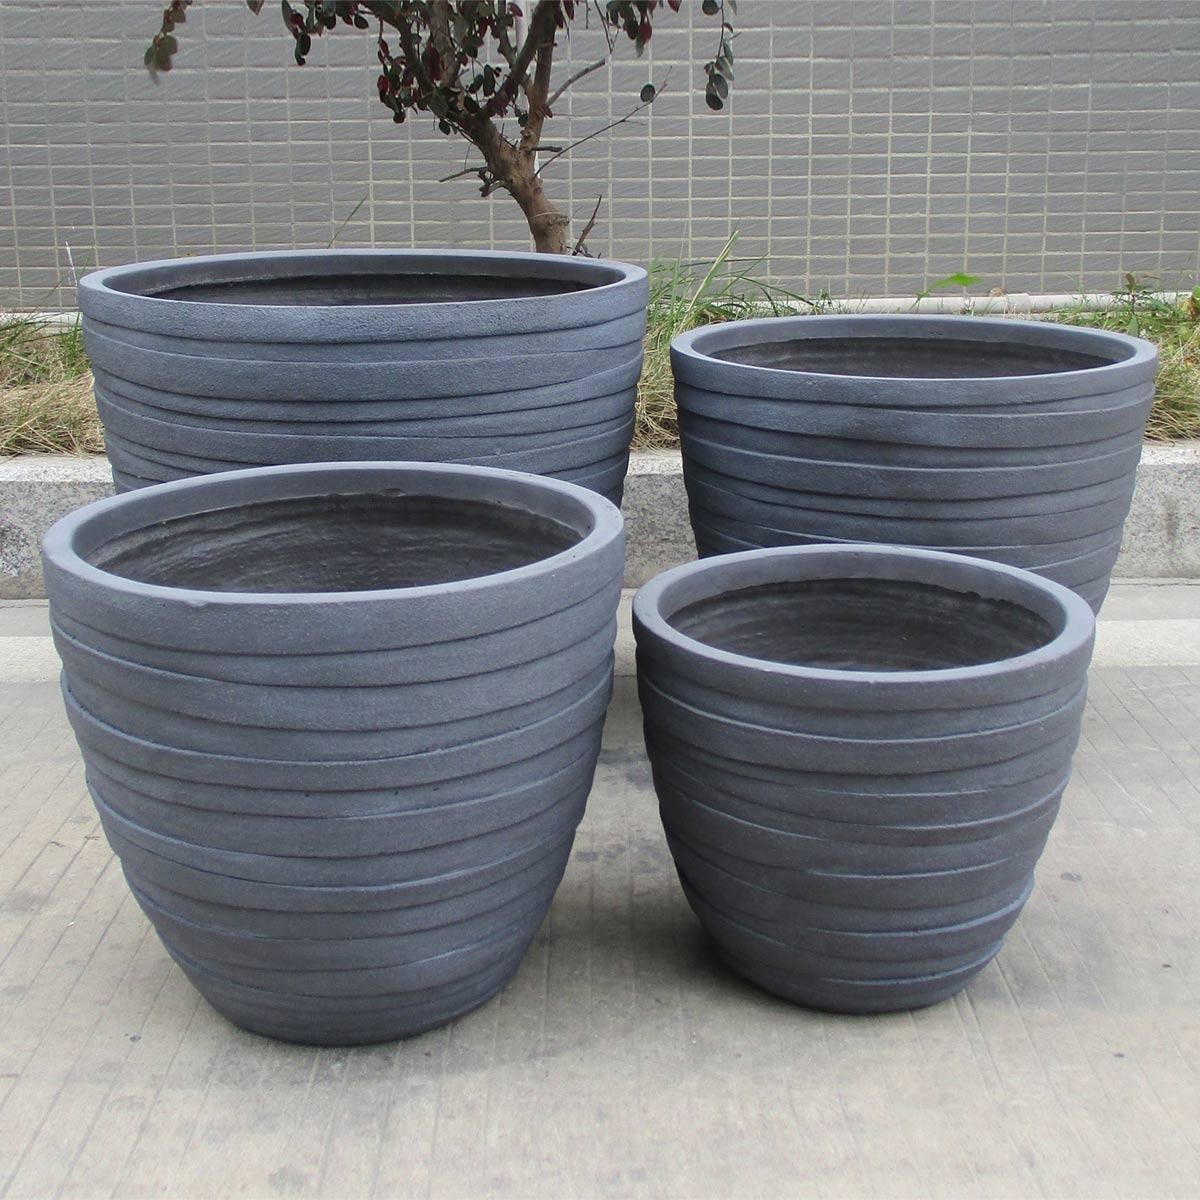 Garden Planters, Pots and Container Gardening